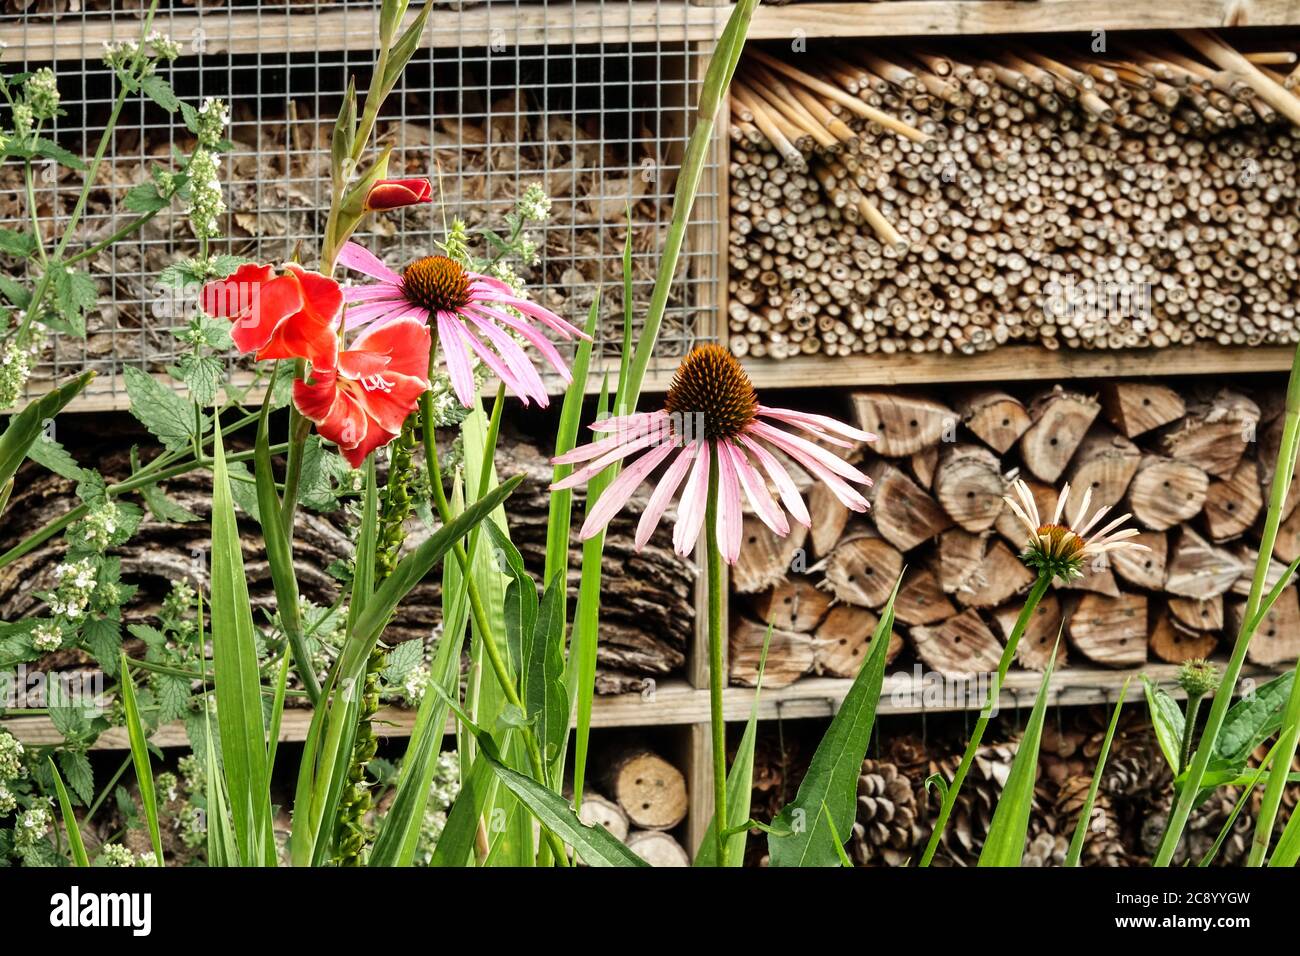 Bug shelter, bug hotel encouraging wildlife, wooden box in garden, refuge place for beneficial insects Insect hotel garden flowers Stock Photo